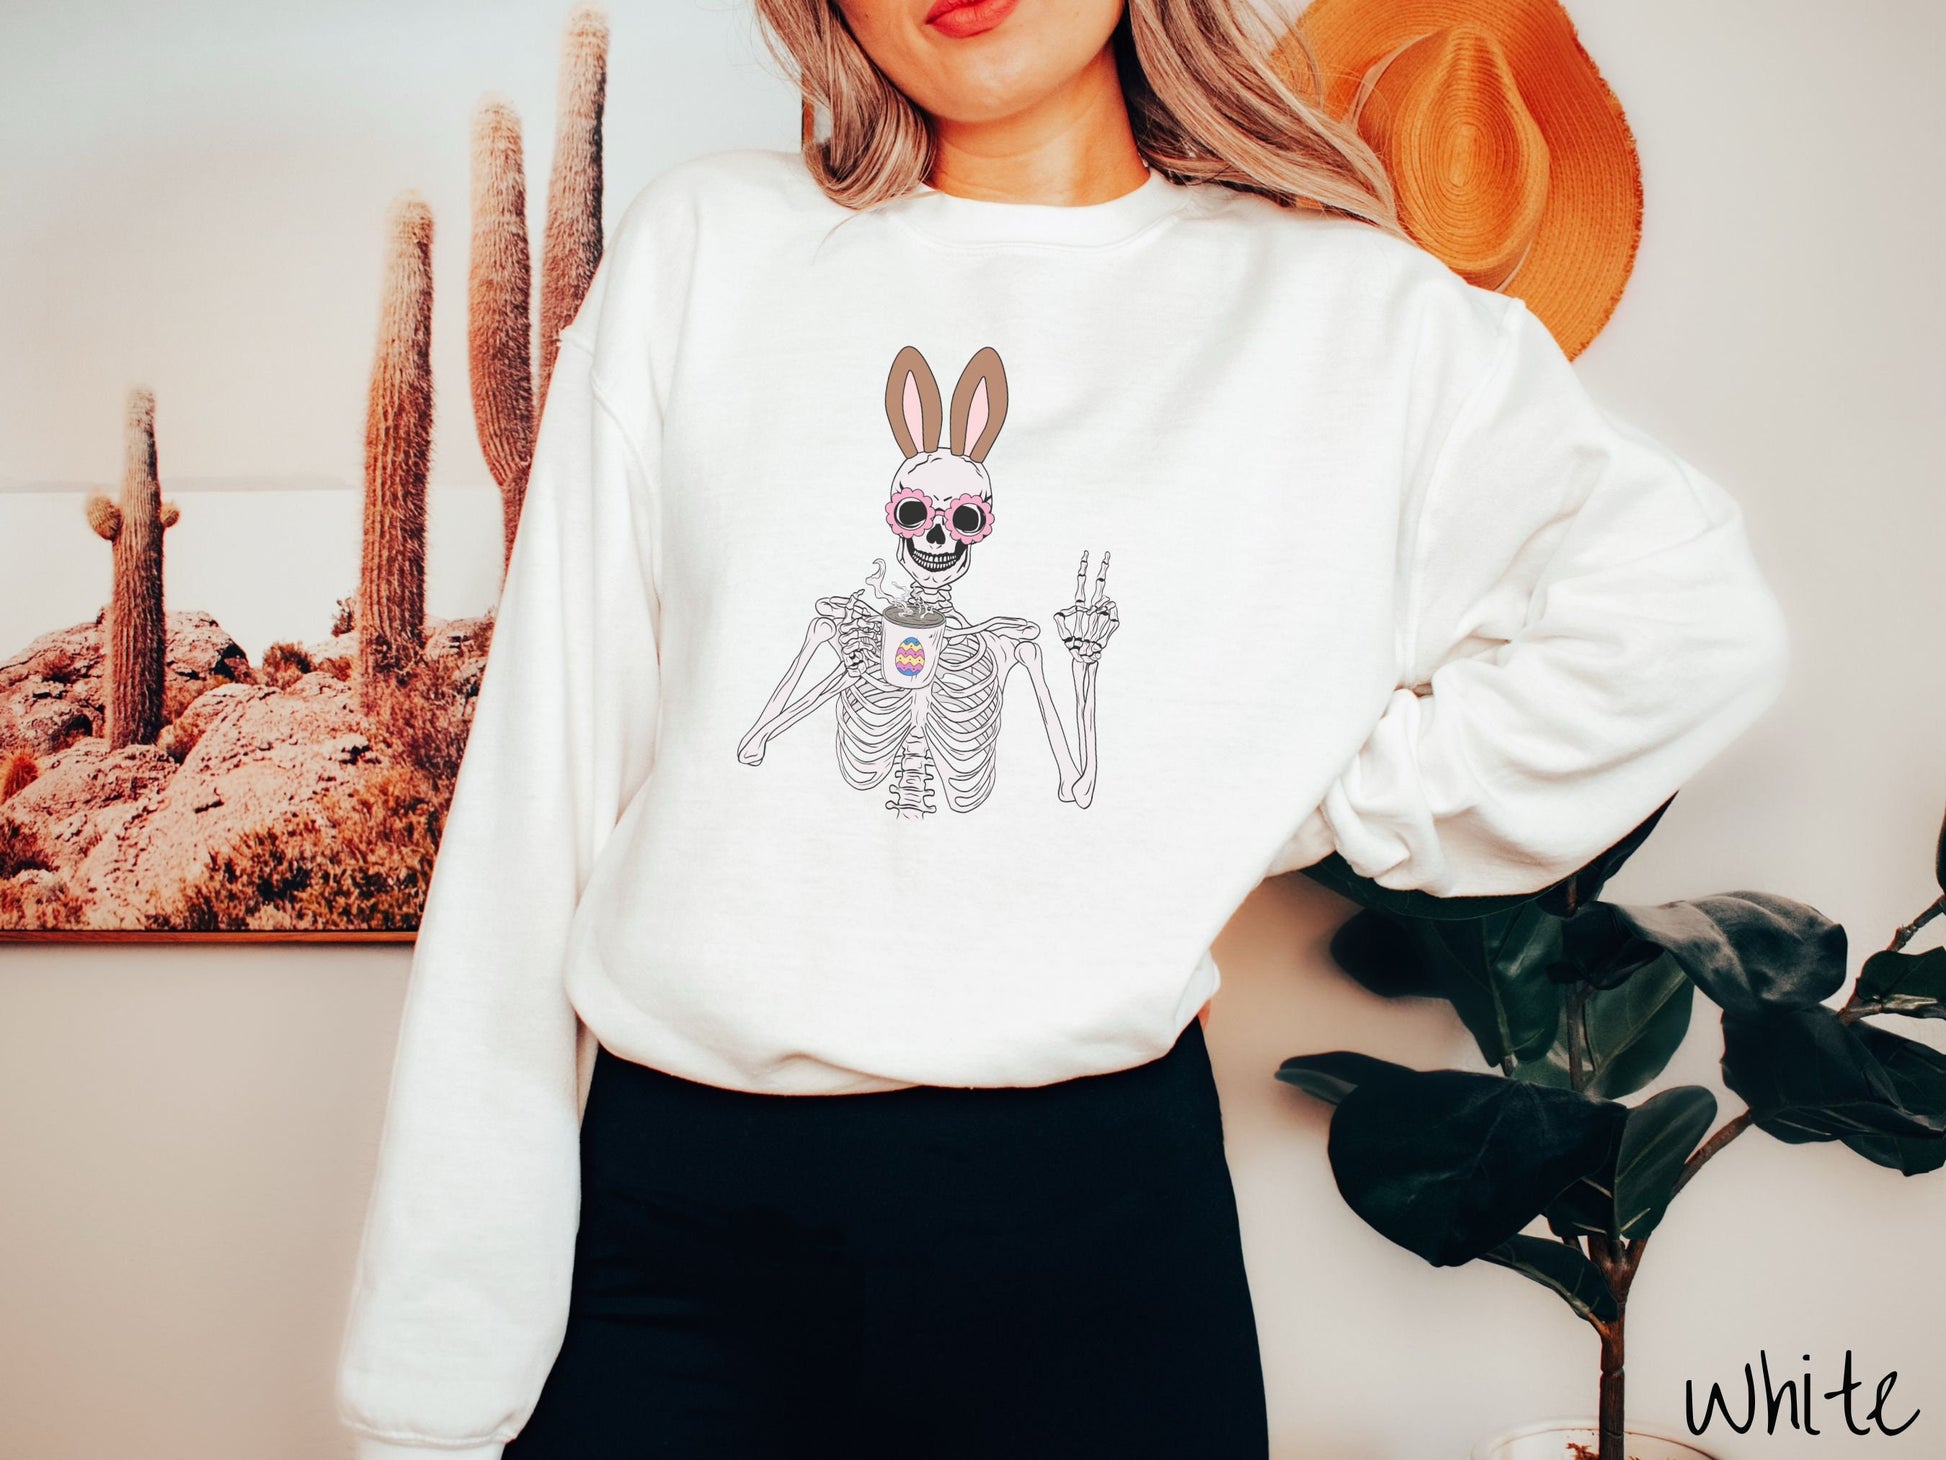 A woman wearing a cute, vintage white colored sweatshirt with a pink-toned skeleton wearing pink glasses and brown bunny ears, holding a cup of coffee and holding up a peace sign with the other hand. The white coffee cup has a colorful Easter egg.